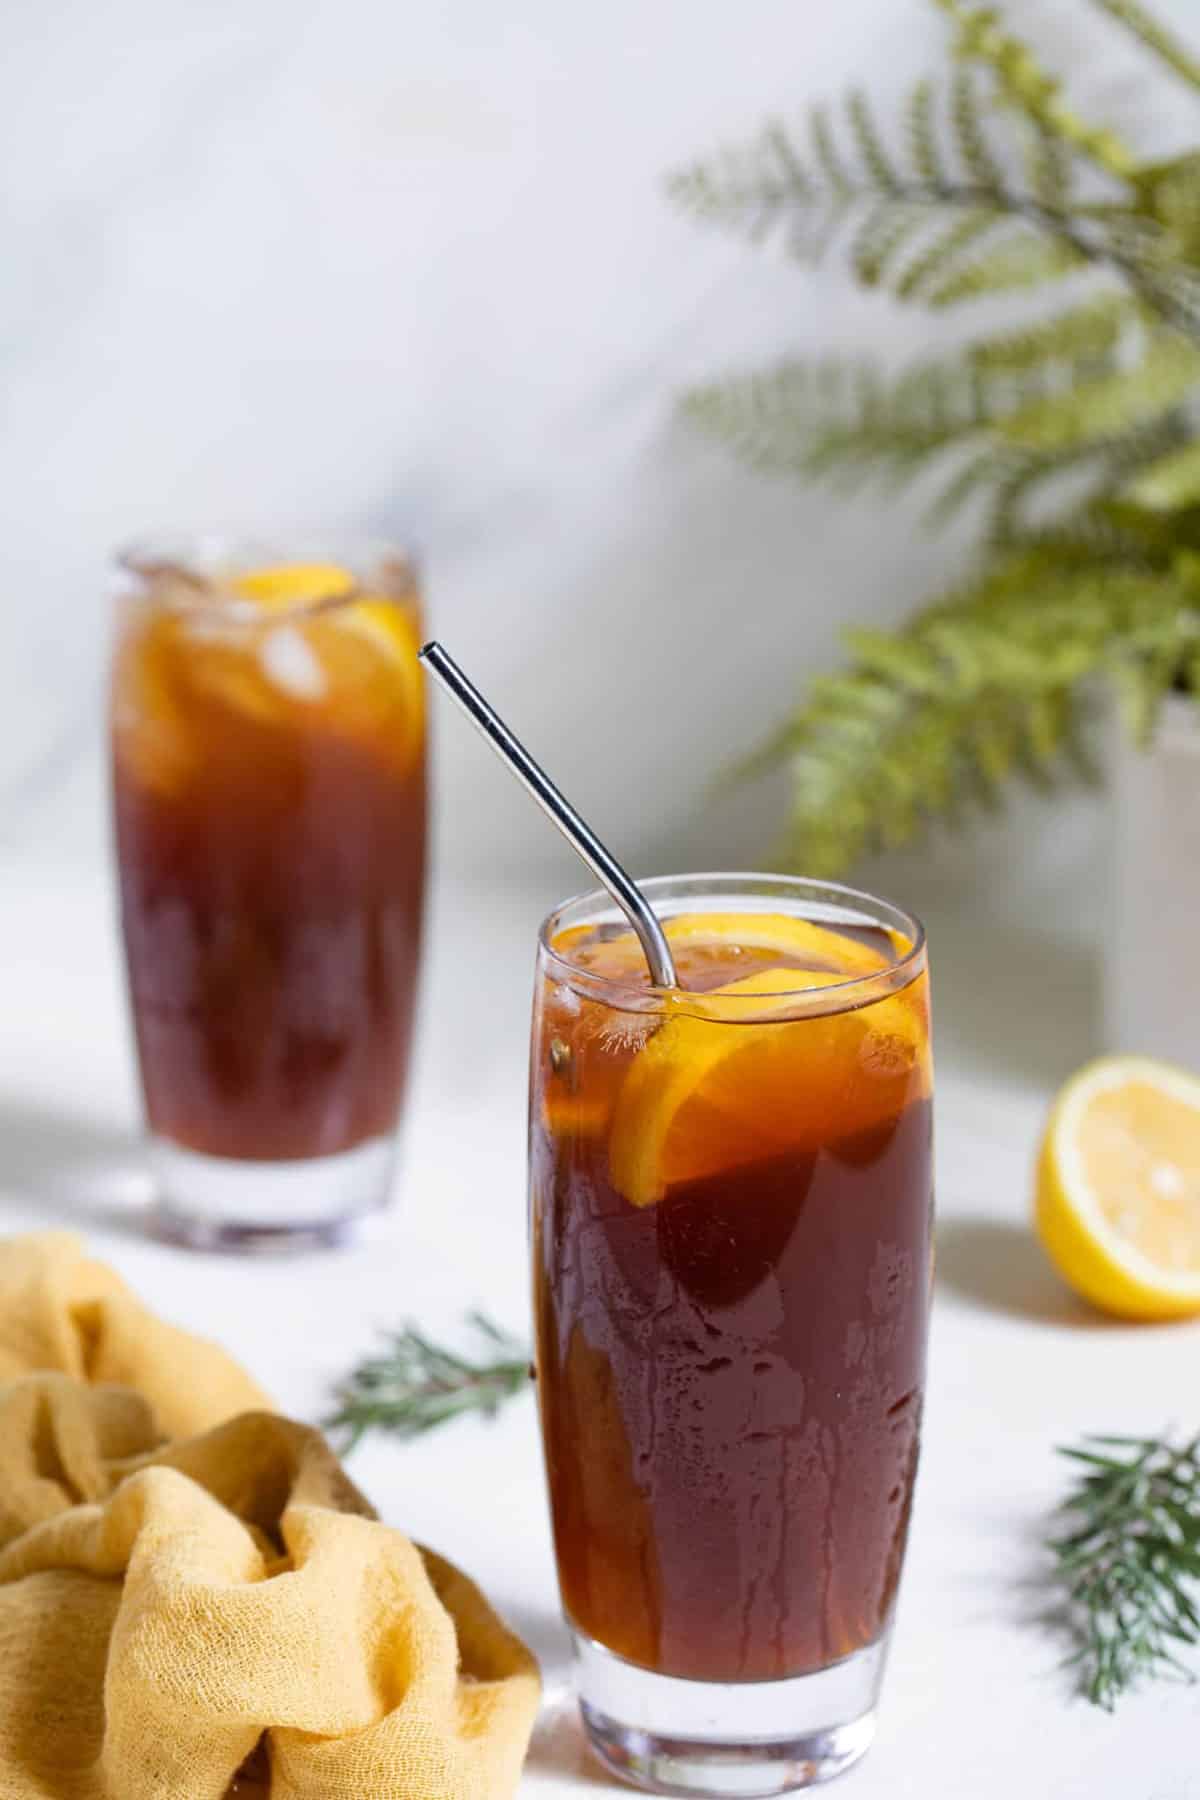 Traditional Southern Iced Sweet Tea